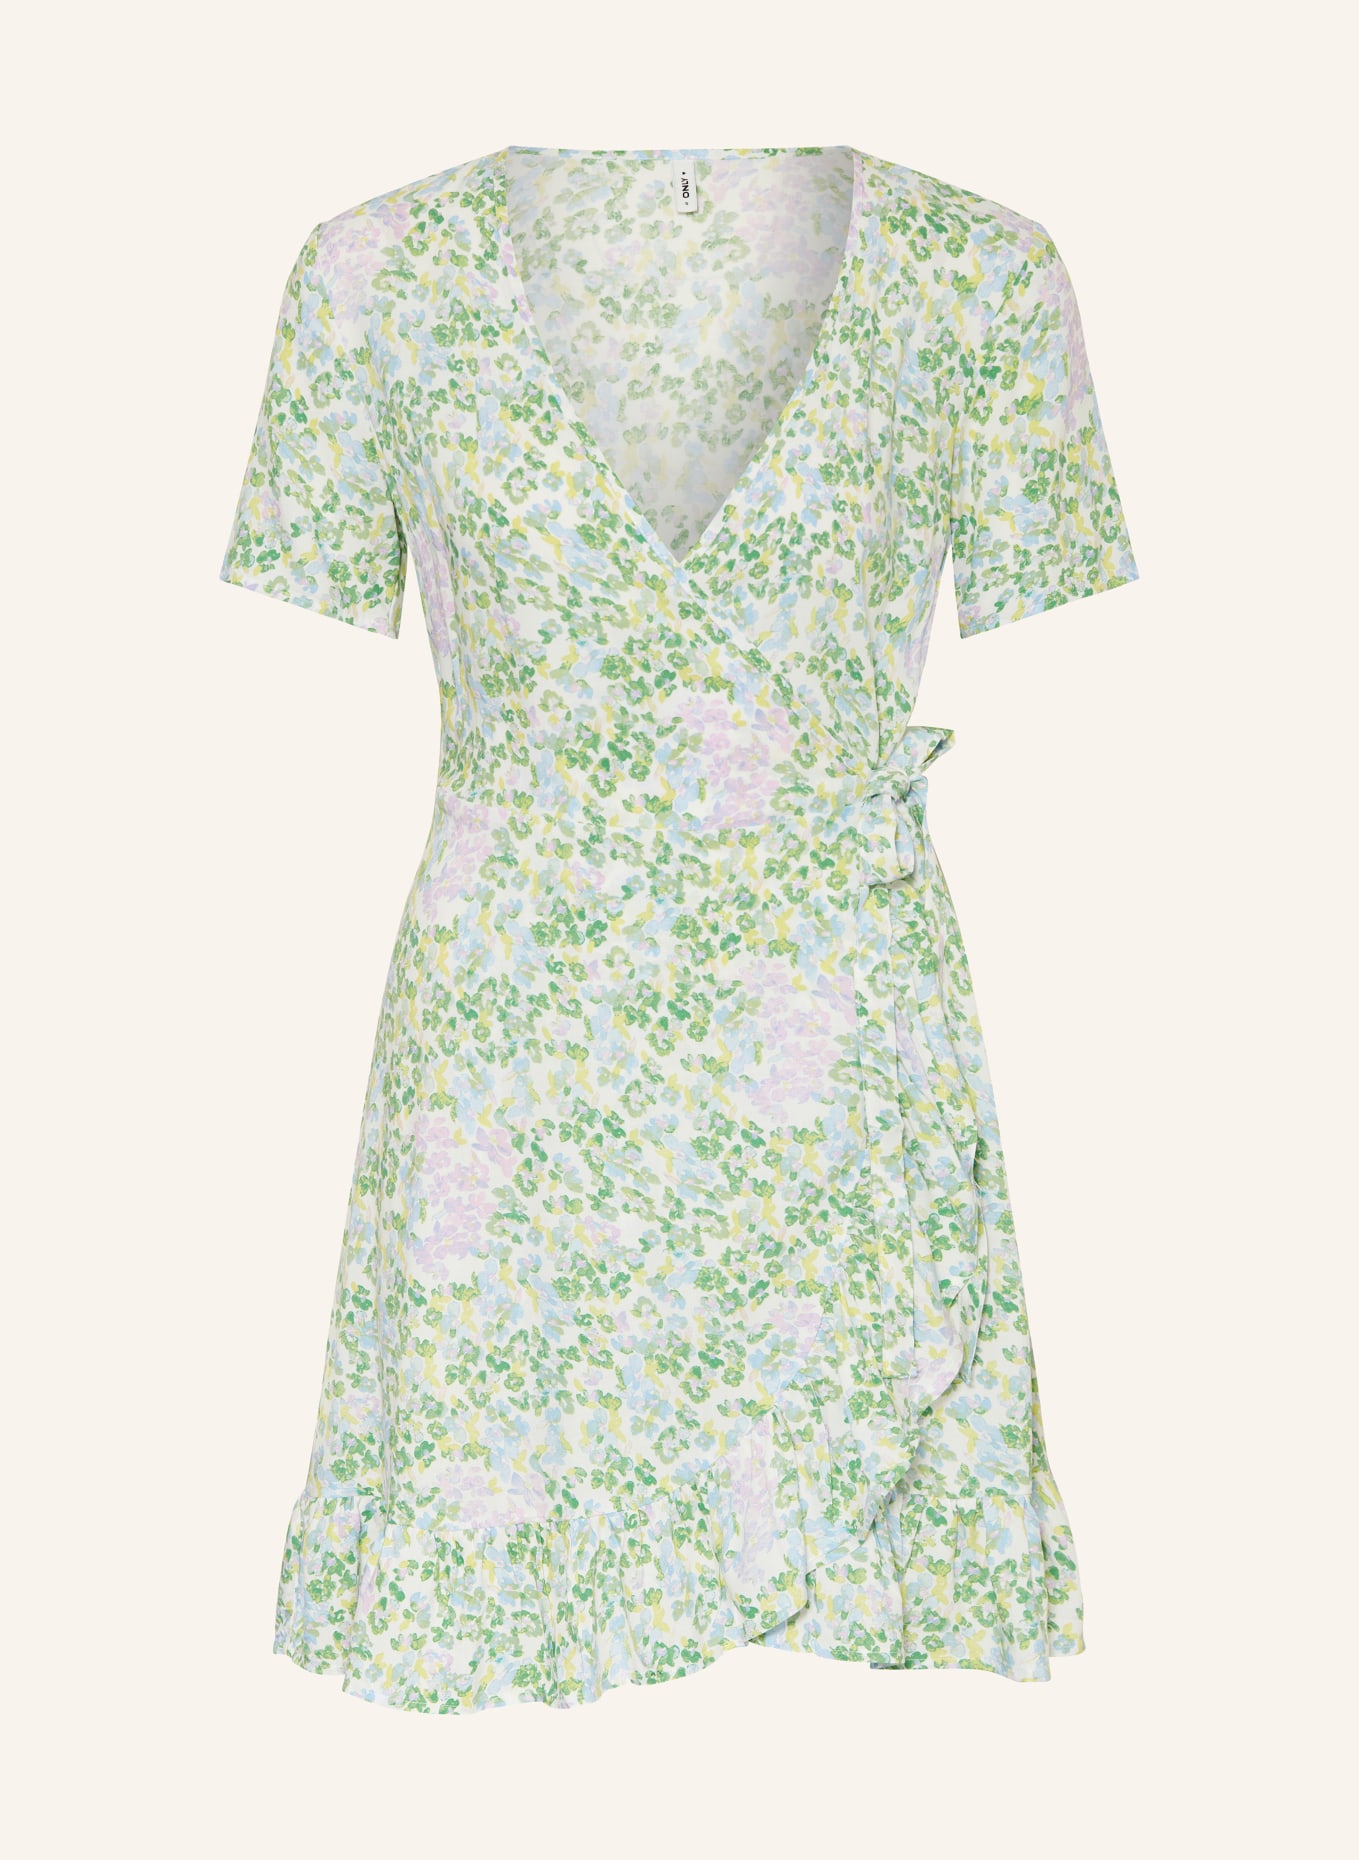 ONLY Wrap dress, Color: GREEN/ LIGHT PURPLE/ YELLOW (Image 1)